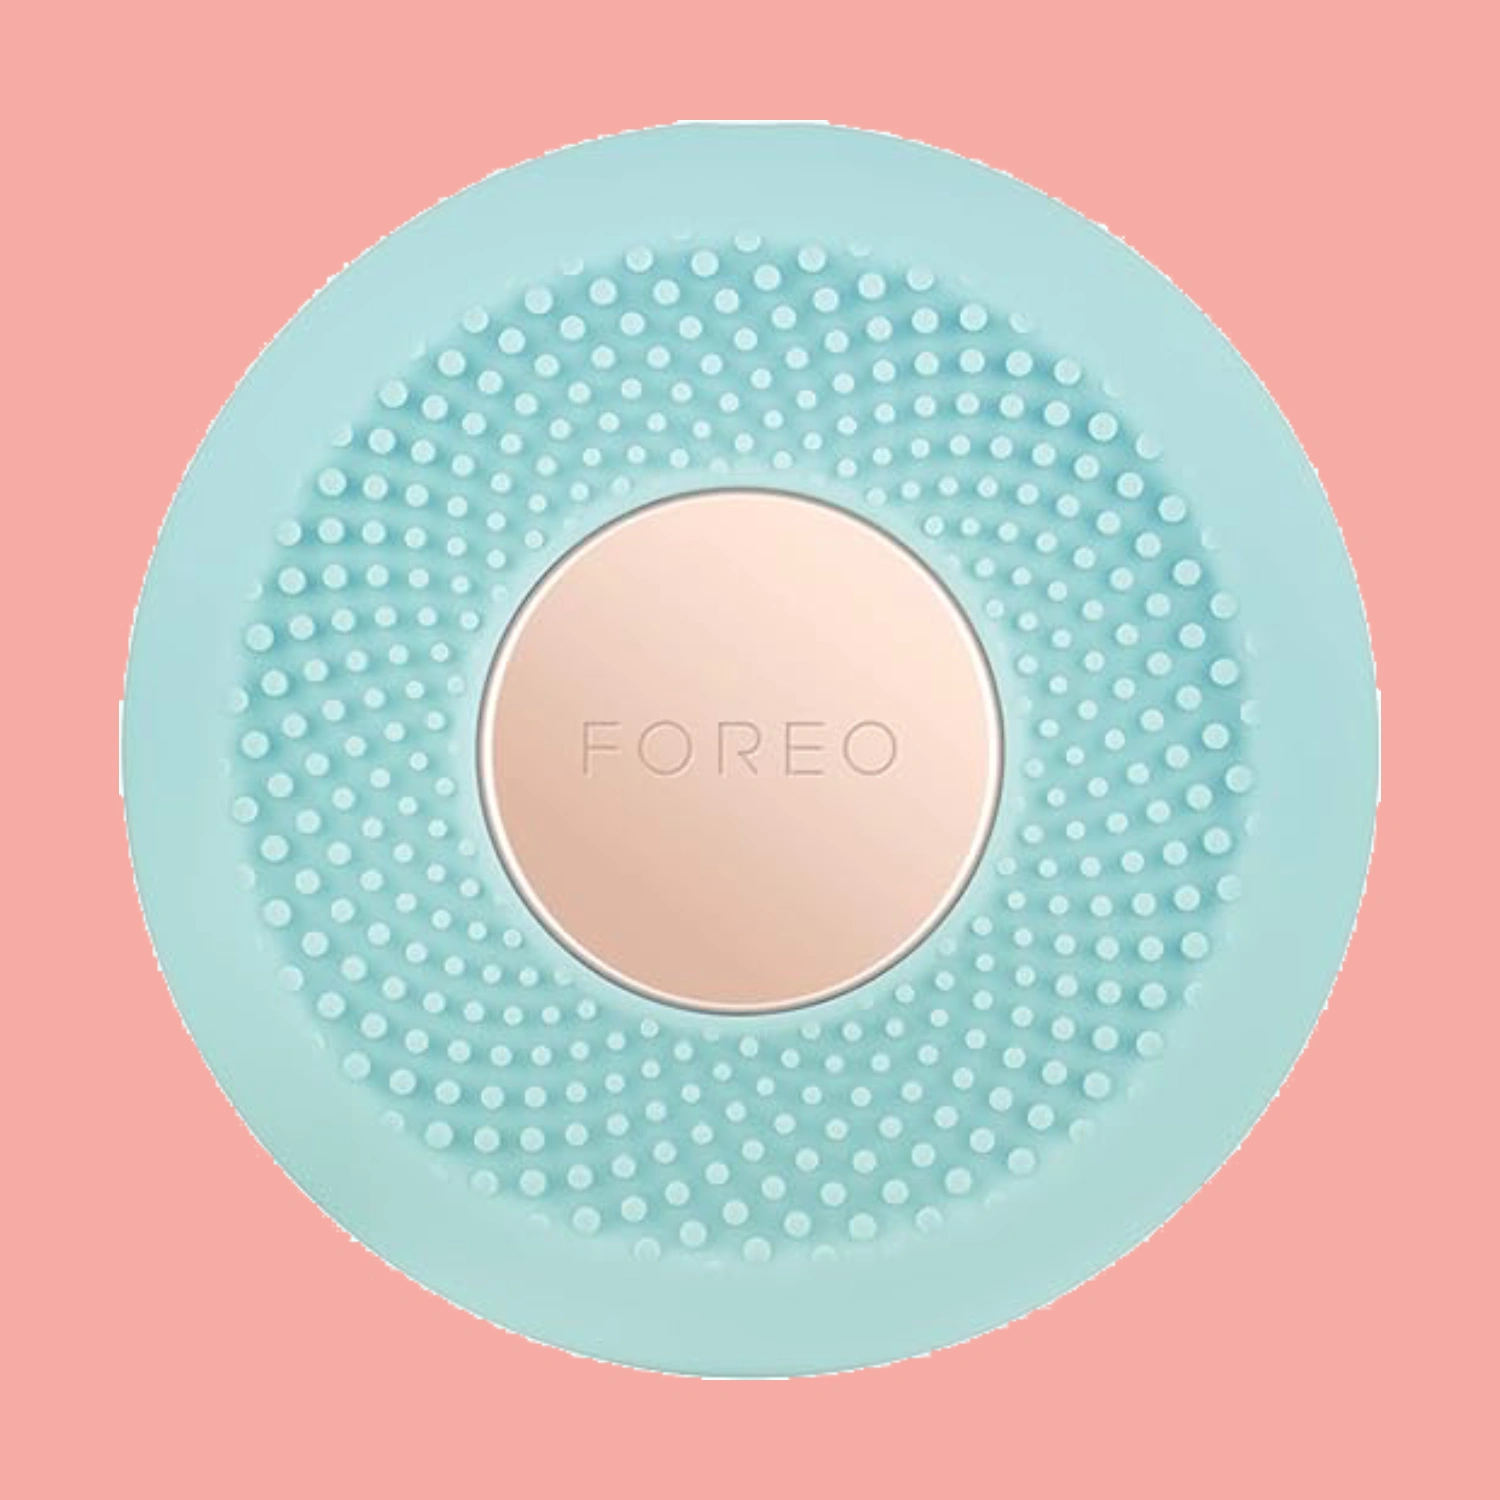 Foreo UFO device on a pink background various LED lights, for a personalized skincare treatment.